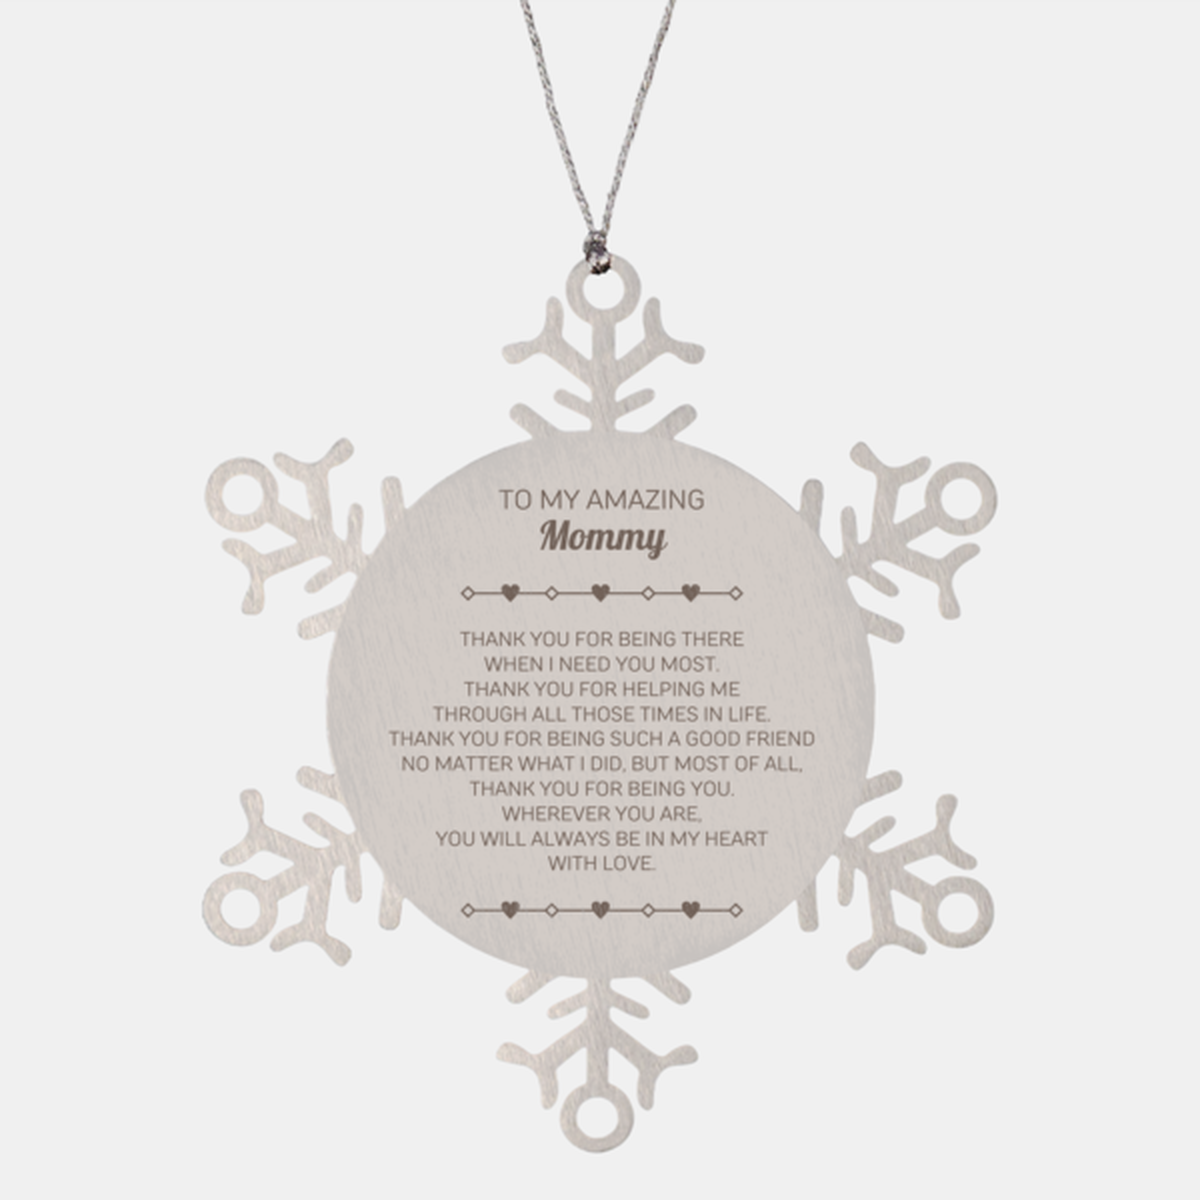 To My Amazing Mommy Snowflake Ornament, Thank you for being there, Thank You Gifts For Mommy, Birthday, Christmas Unique Gifts For Mommy